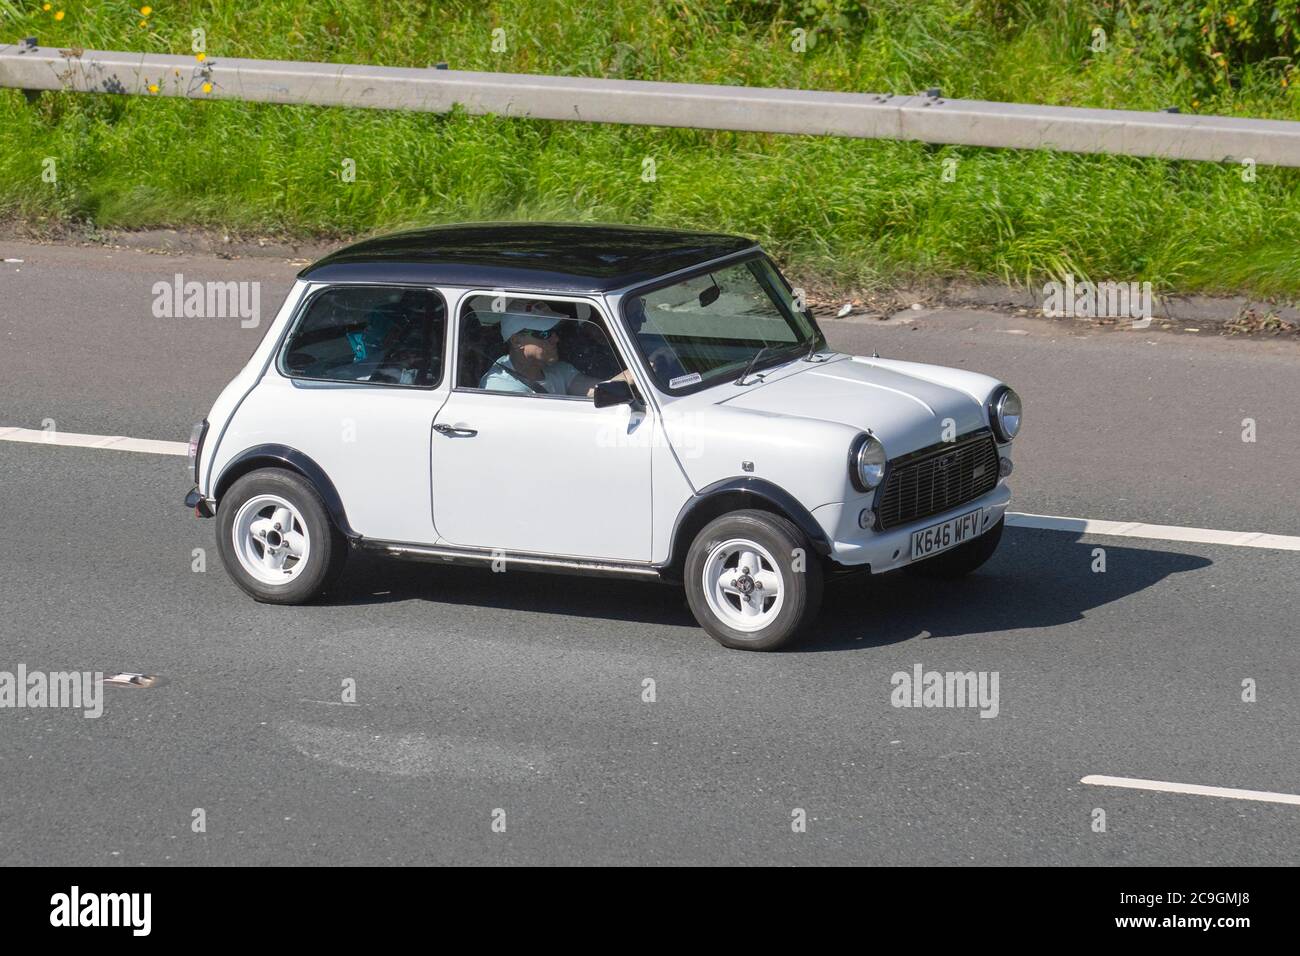 North West Classic Mini Owners club 1993 white Rover Mini Mayfair Auto; Vehicular traffic moving vehicles, cars driving vehicle on UK roads, motors, motoring on the M6 motorway highway network. Stock Photo